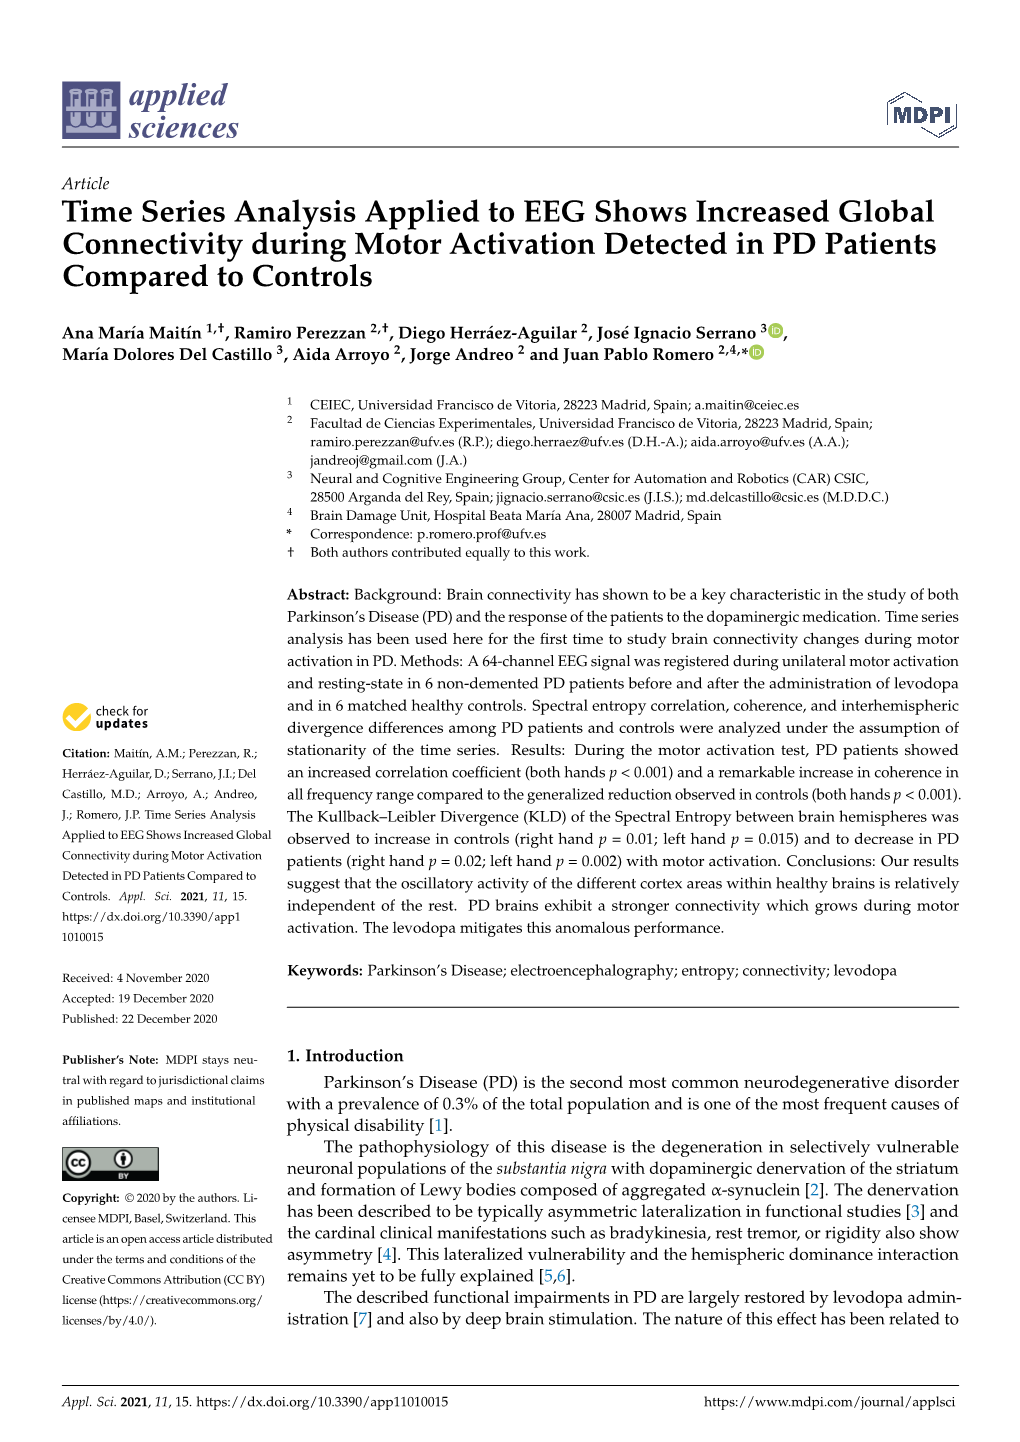 Time Series Analysis Applied to EEG Shows Increased Global Connectivity During Motor Activation Detected in PD Patients Compared to Controls